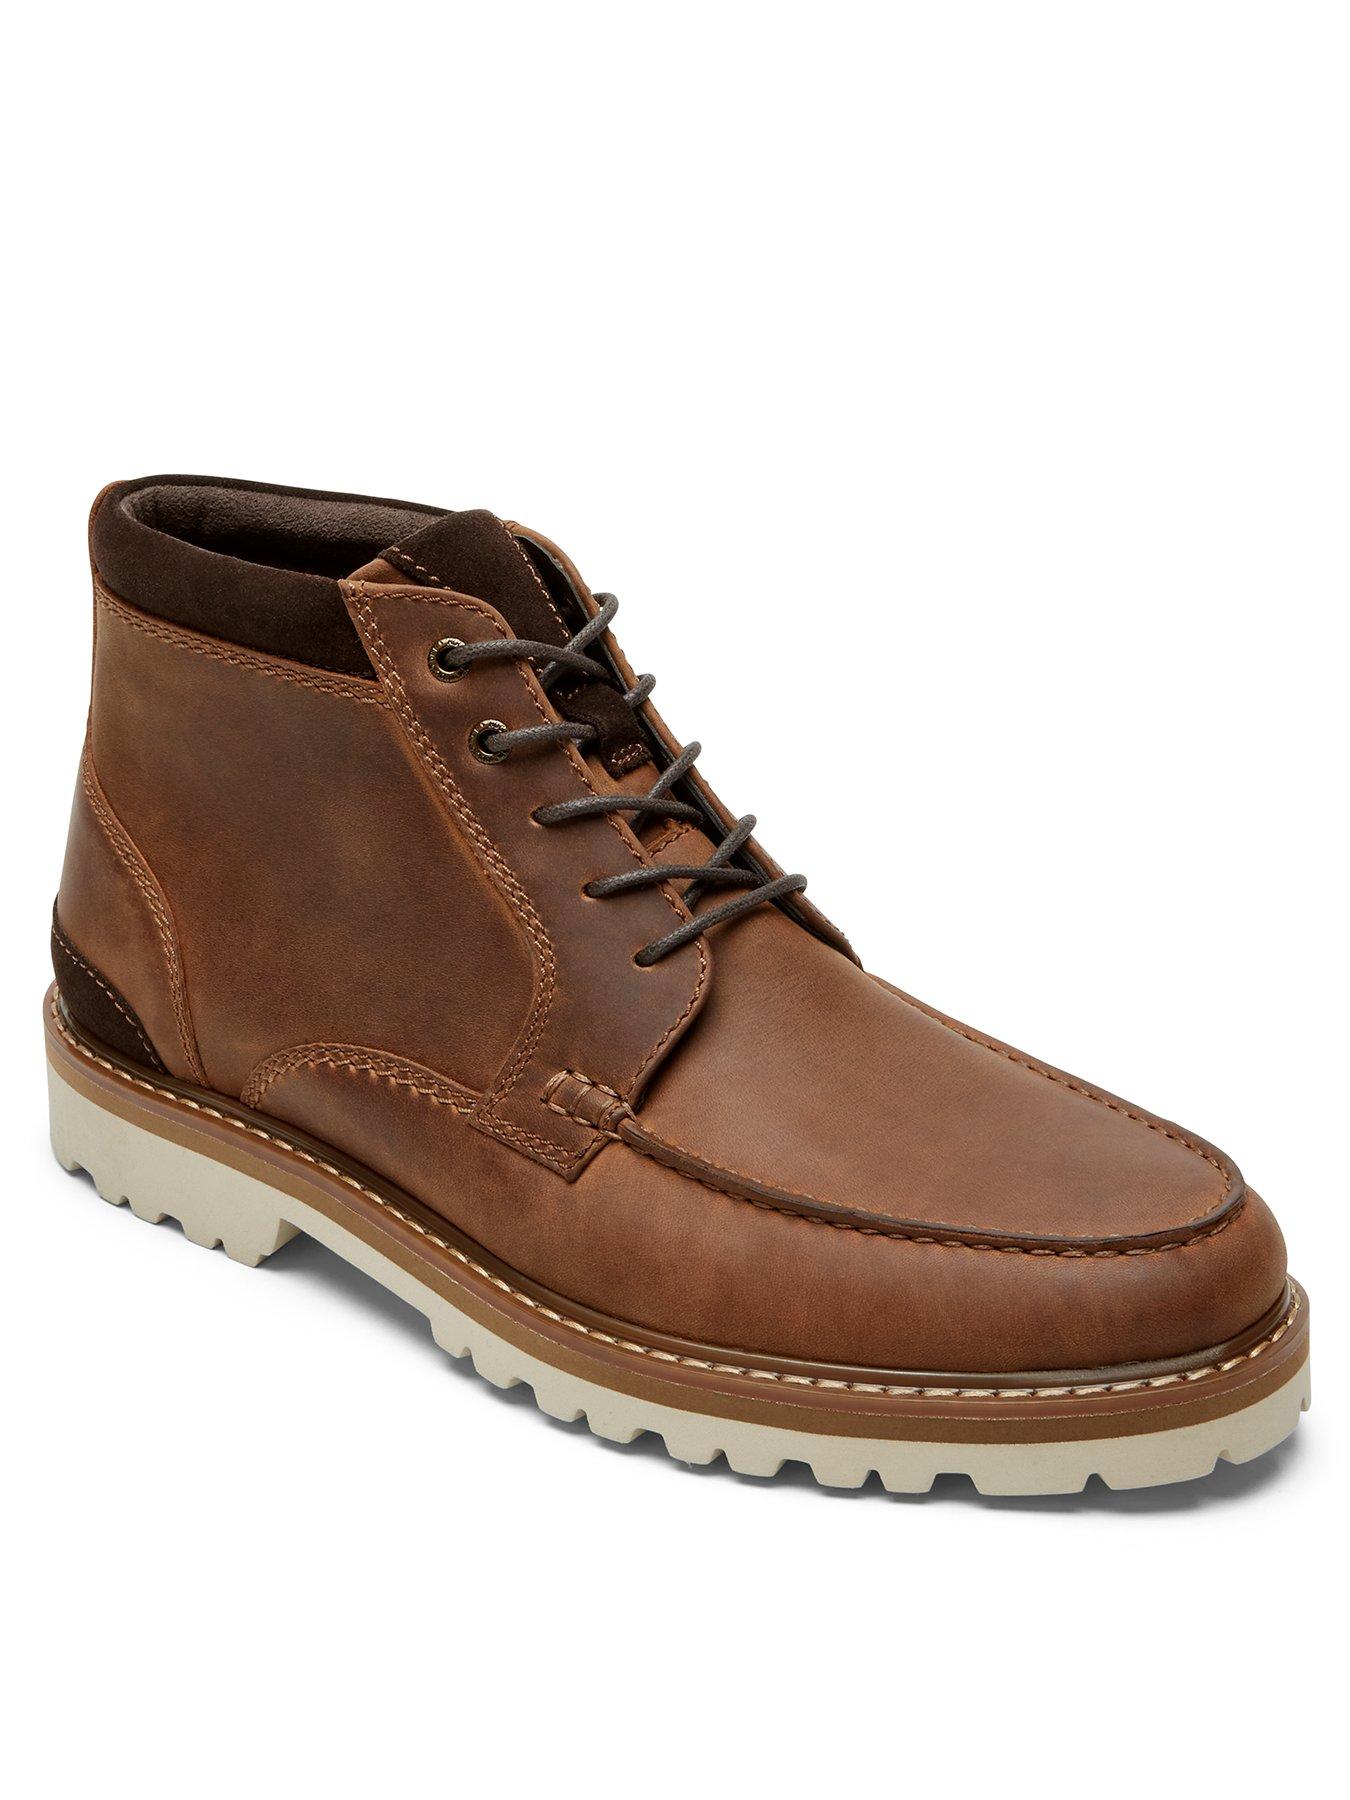 Shoes & boots XCS Business Waterproof Boots - Brown